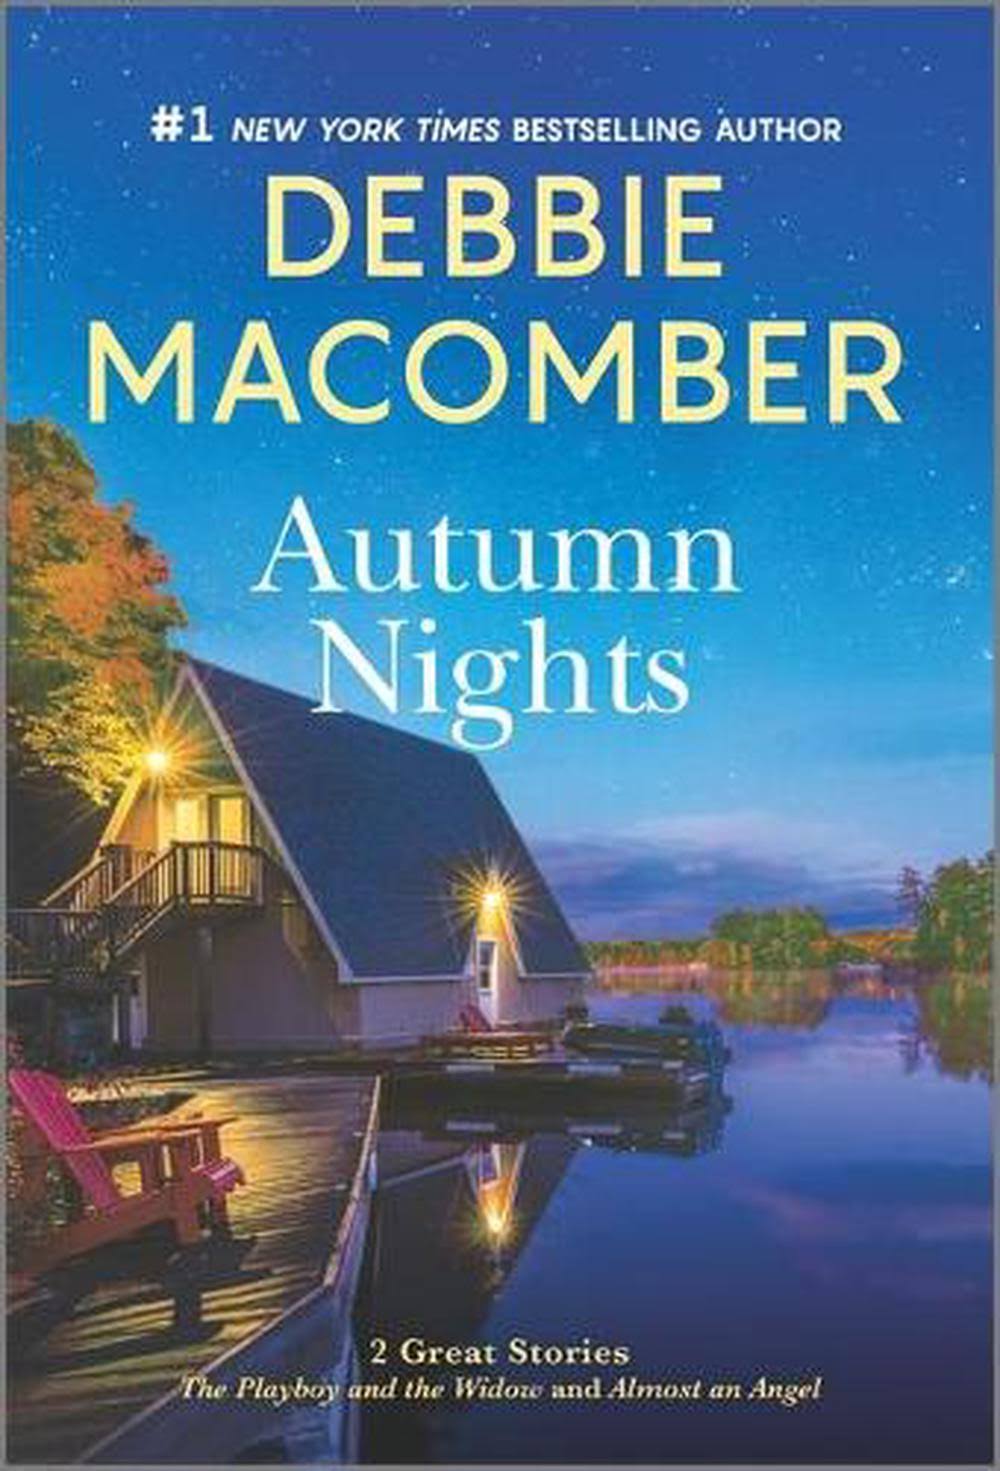 Autumn Nights by Debbie Macomber